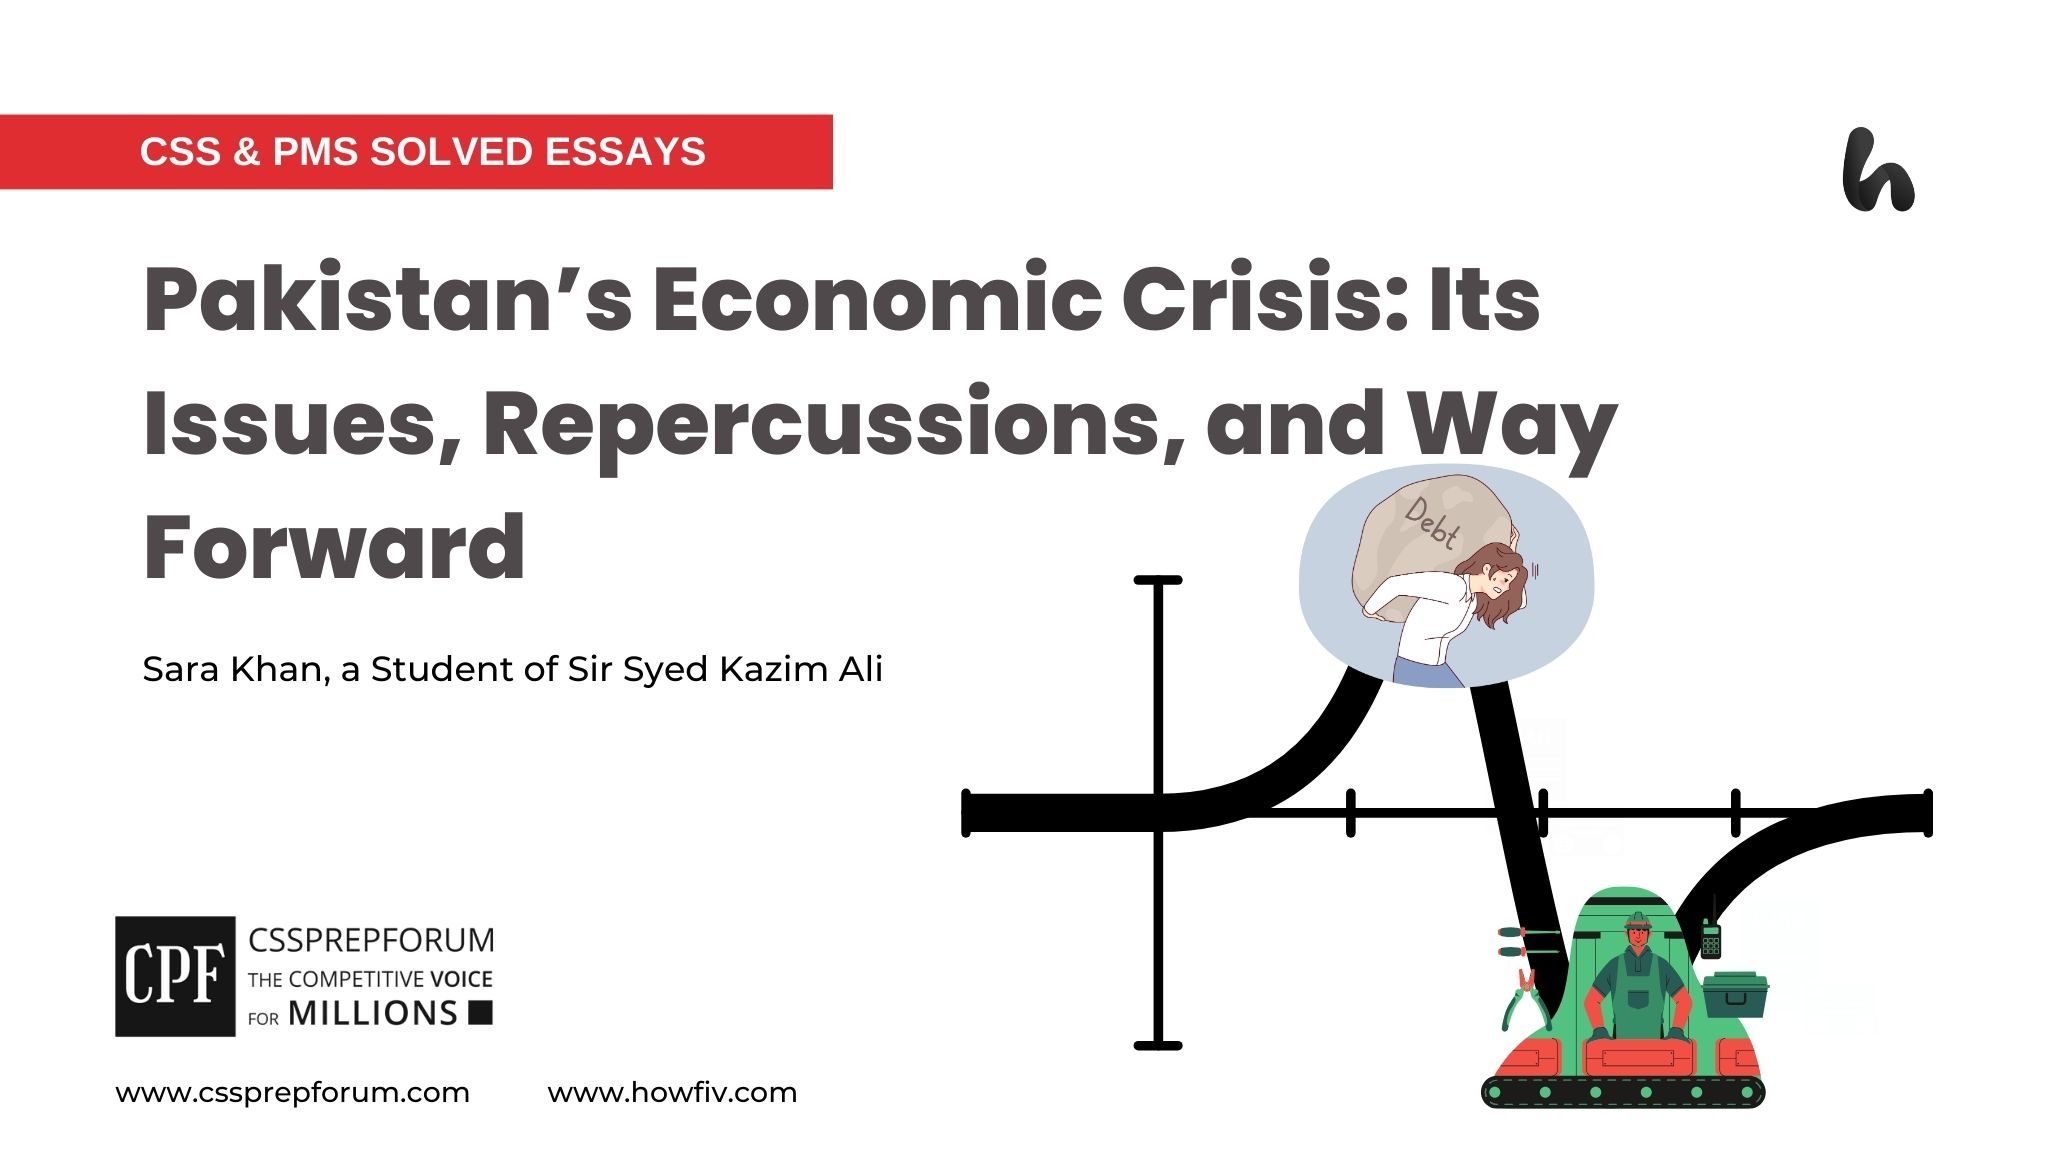 Pakistan’s Economic Crisis: Its Issues, Repercussions, and Way Forward